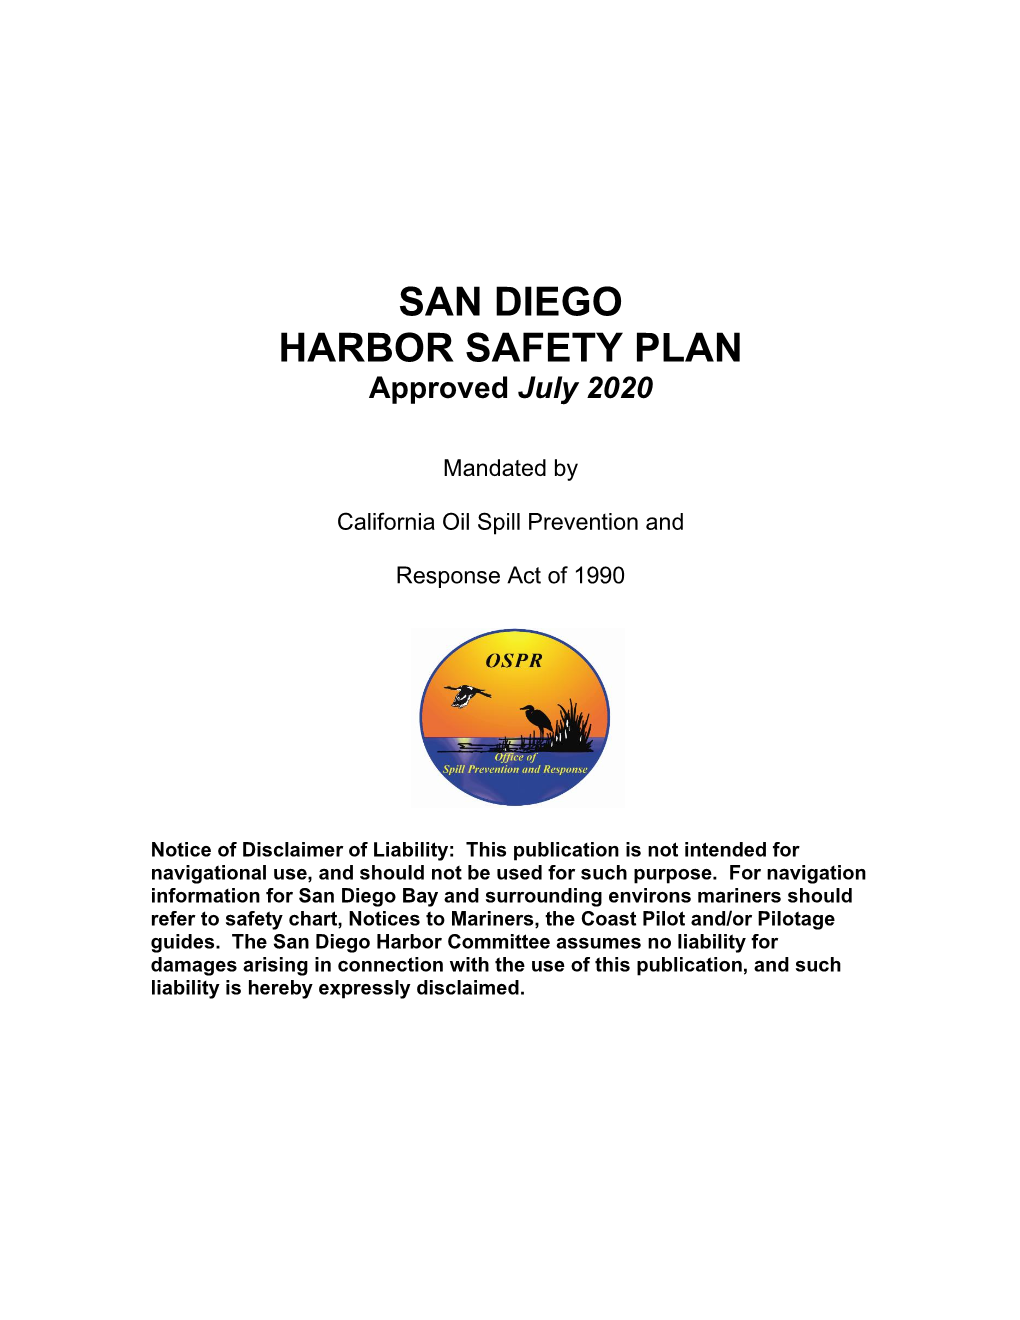 SAN DIEGO HARBOR SAFETY PLAN Approved July 2020